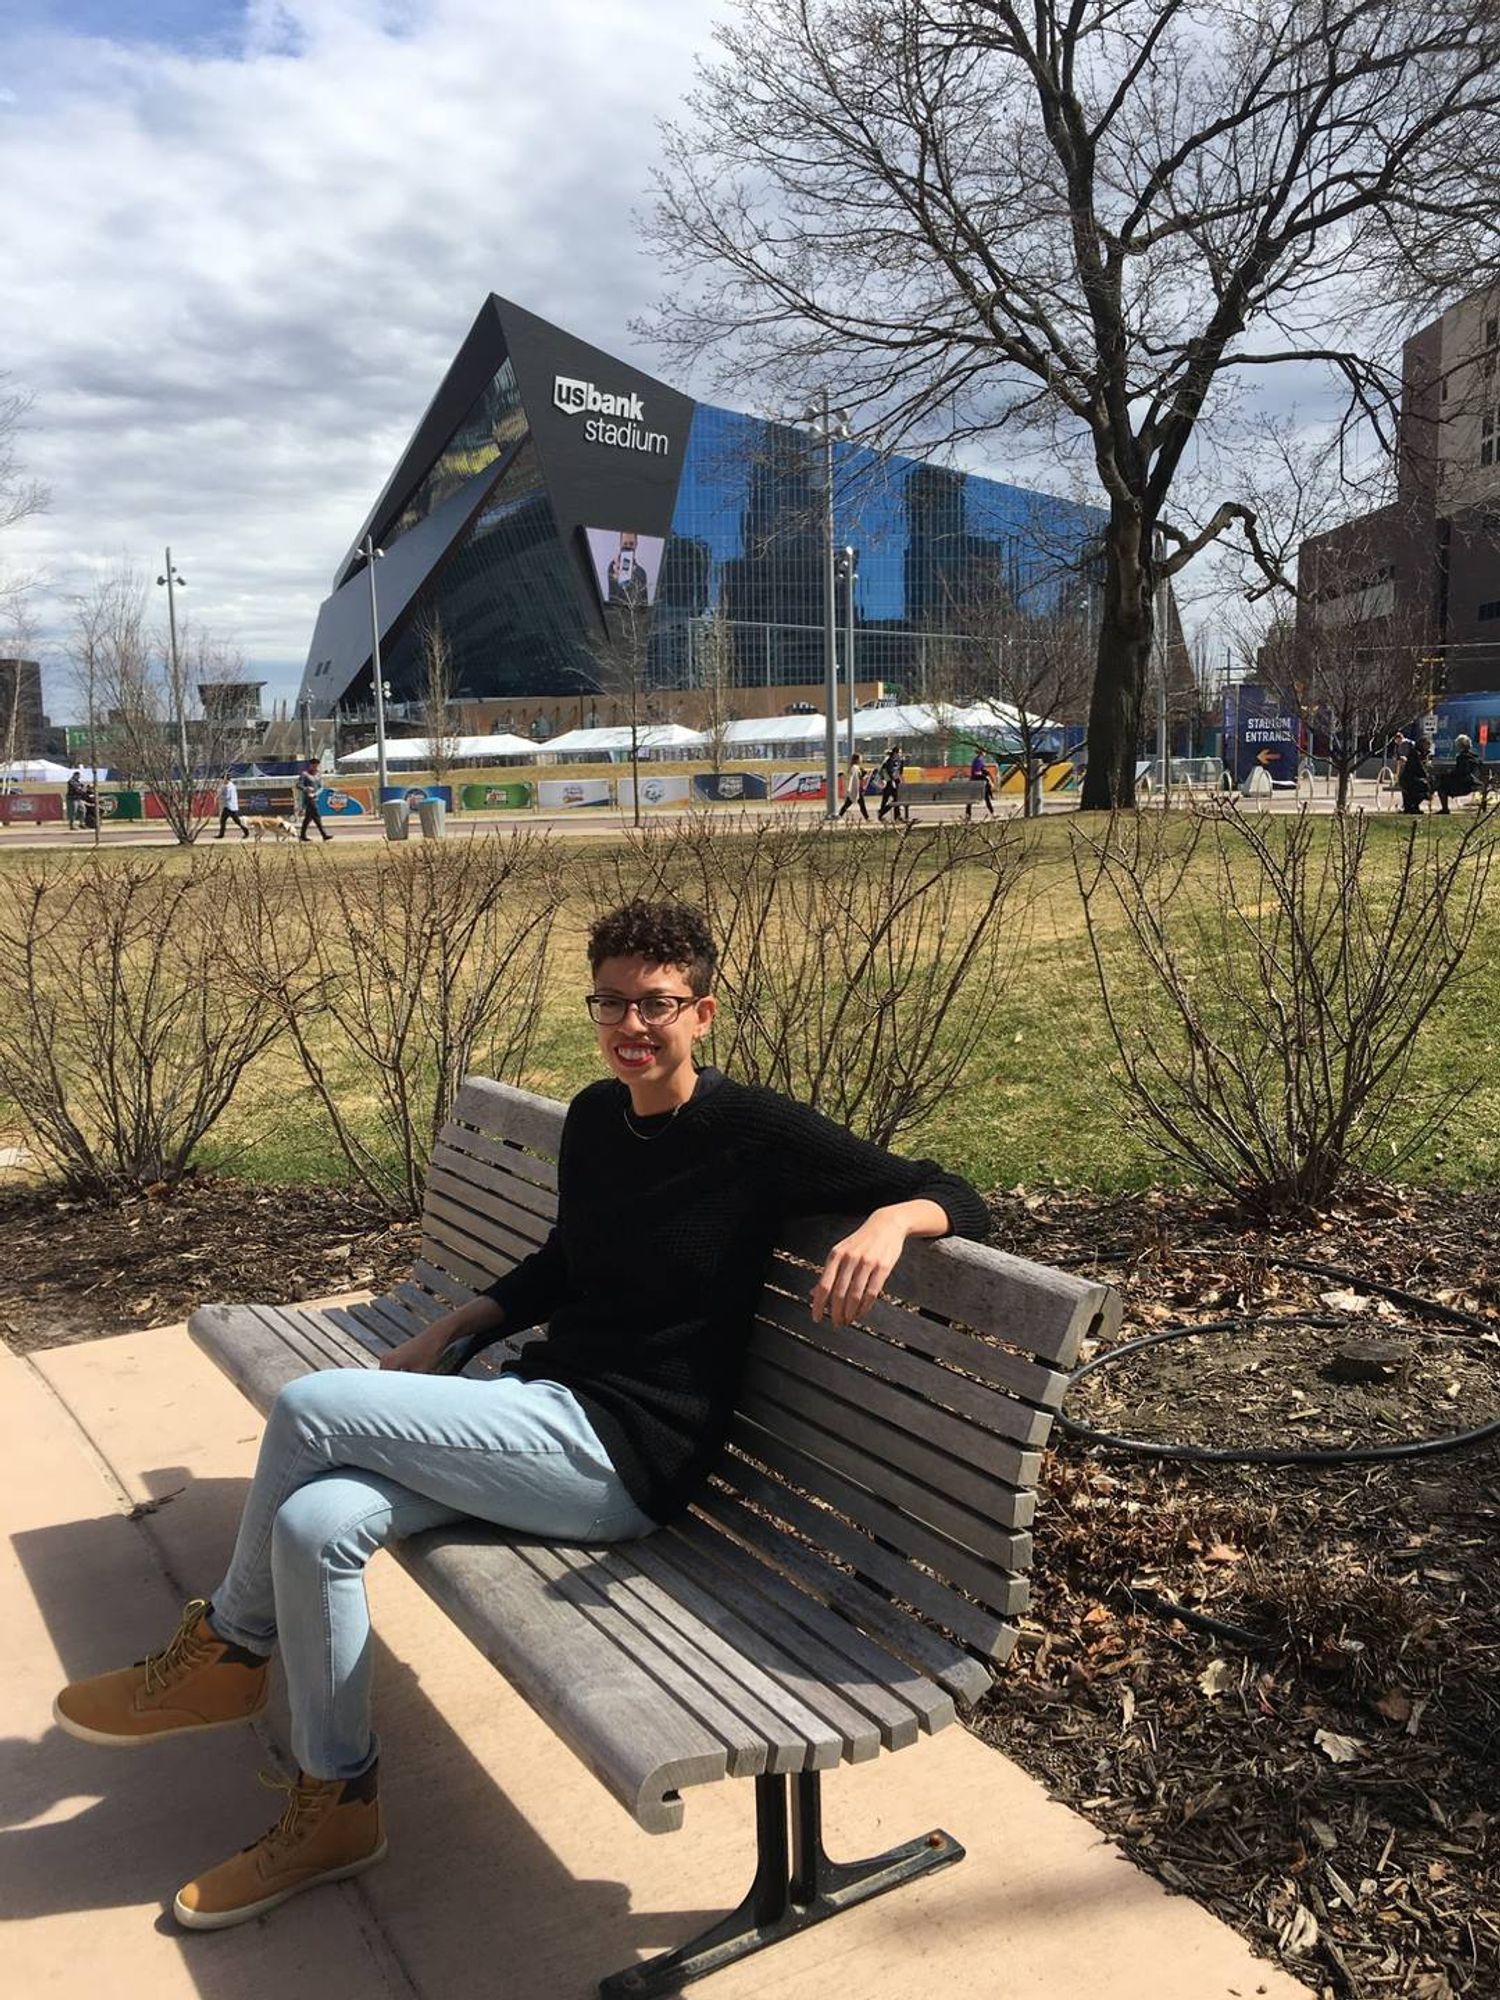 The author in front of US Bank Stadium in downtown Minneapolis.